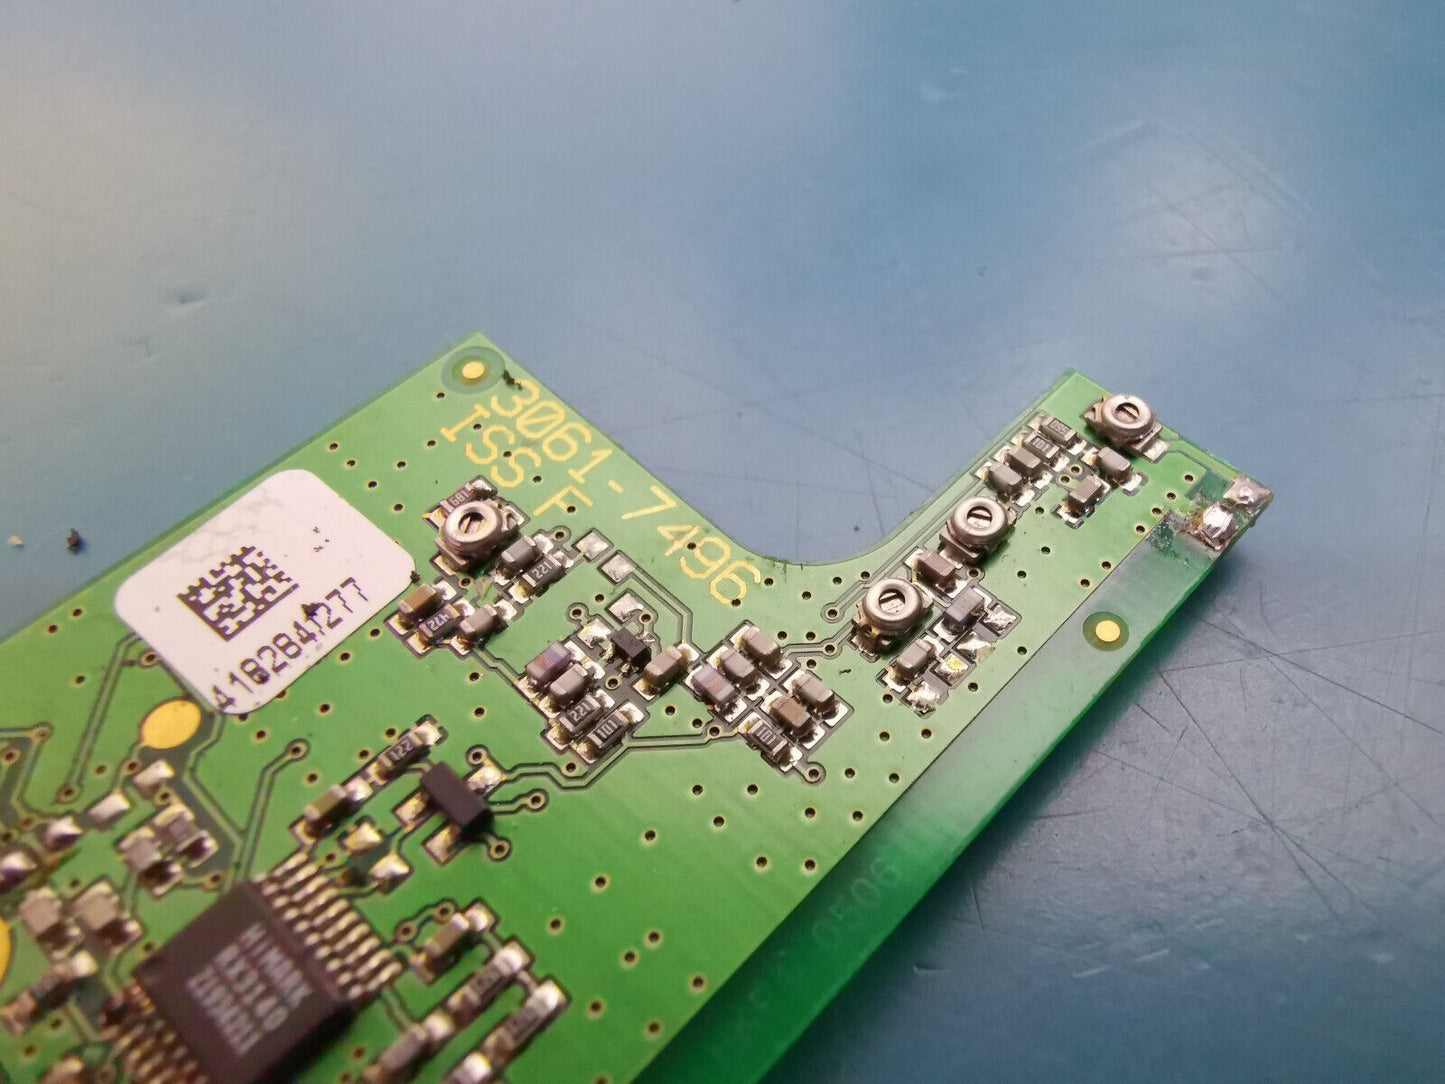 Pager RF PCB Module